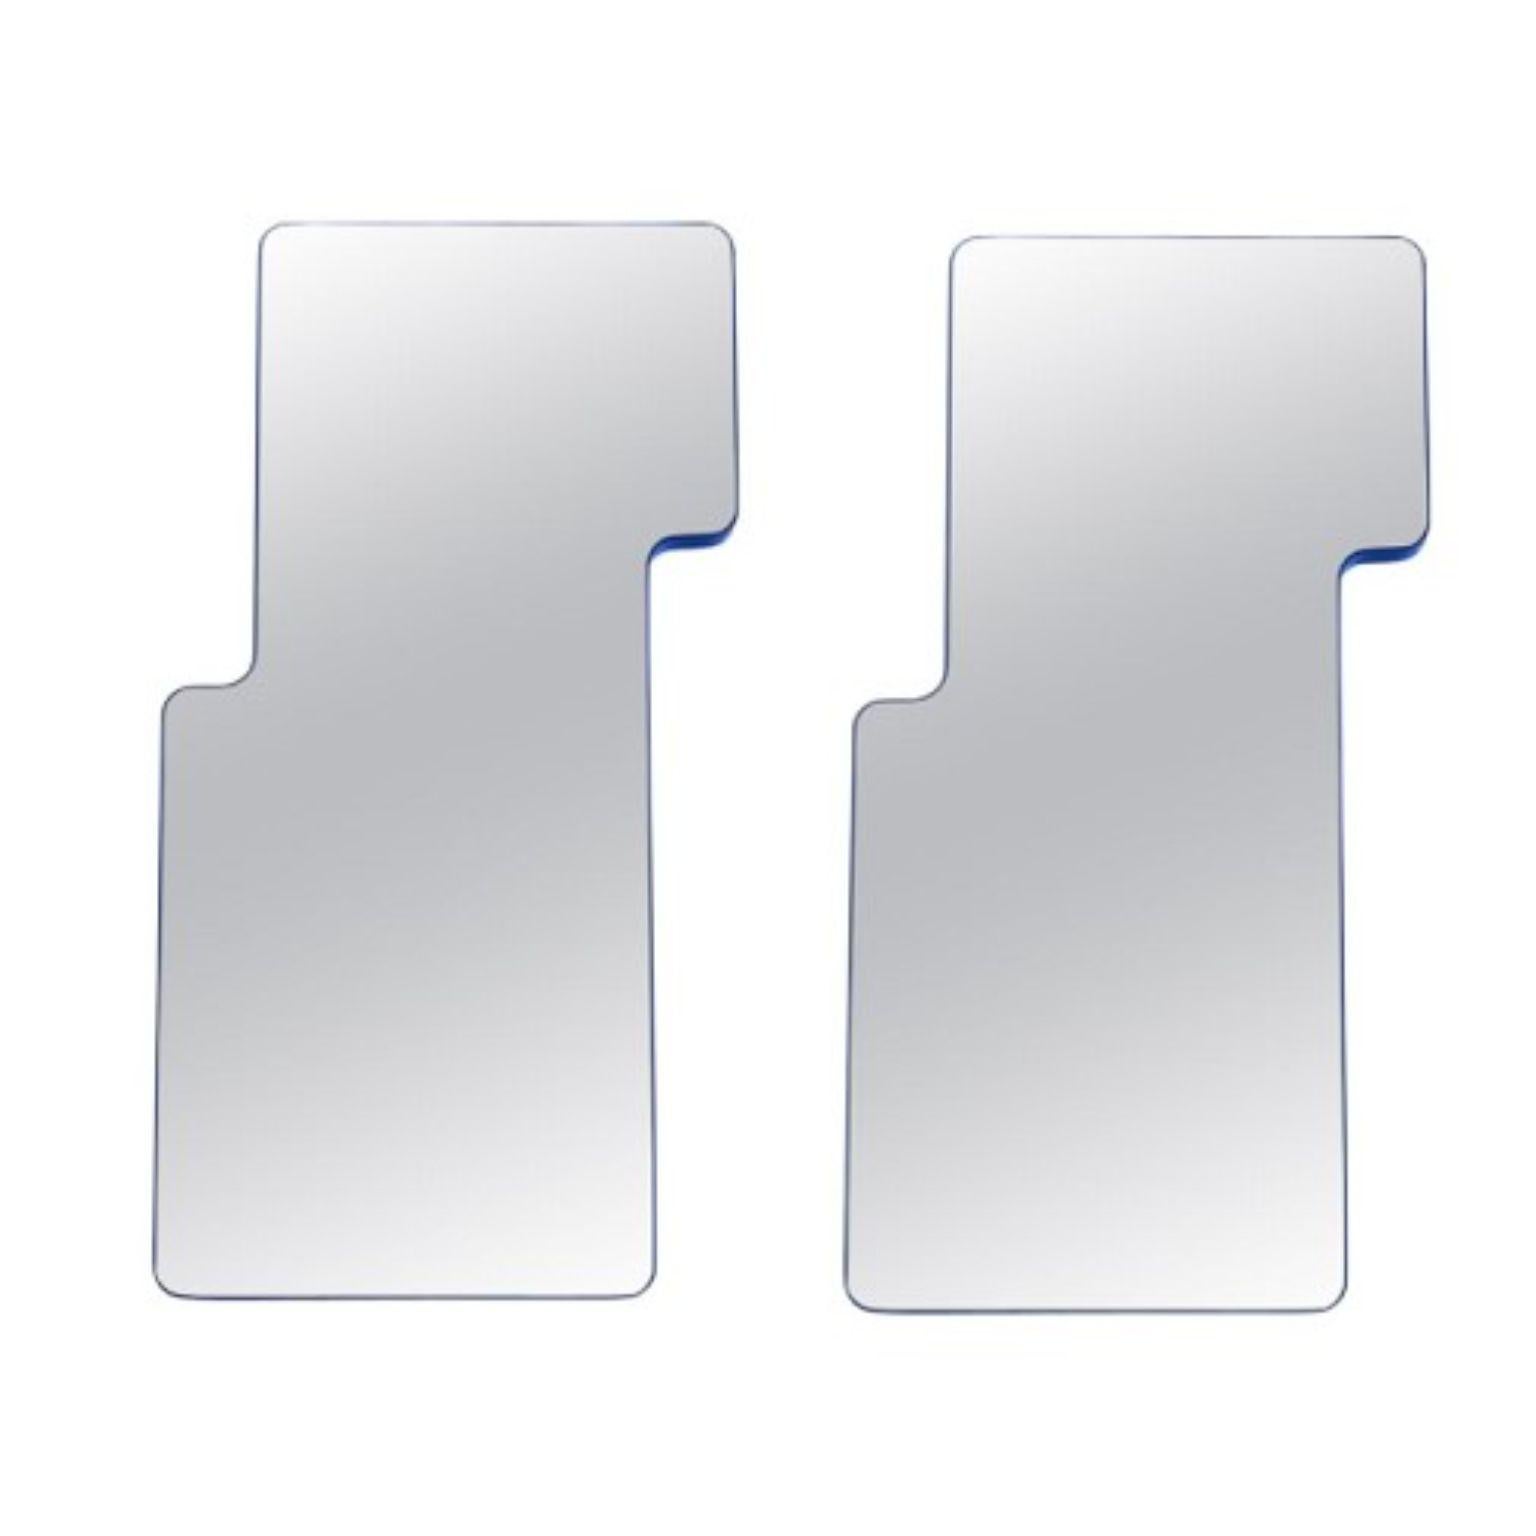 Set of 2 Loveself 04 Mirrors by Oito
Dimensions: D 80 x W 4 x H 180 cm
Materials: Peinting mdf, Silver glass mirror

LOVESELF is a collection of mirrors created by our team of designers oito design. The mission of our collection is to call